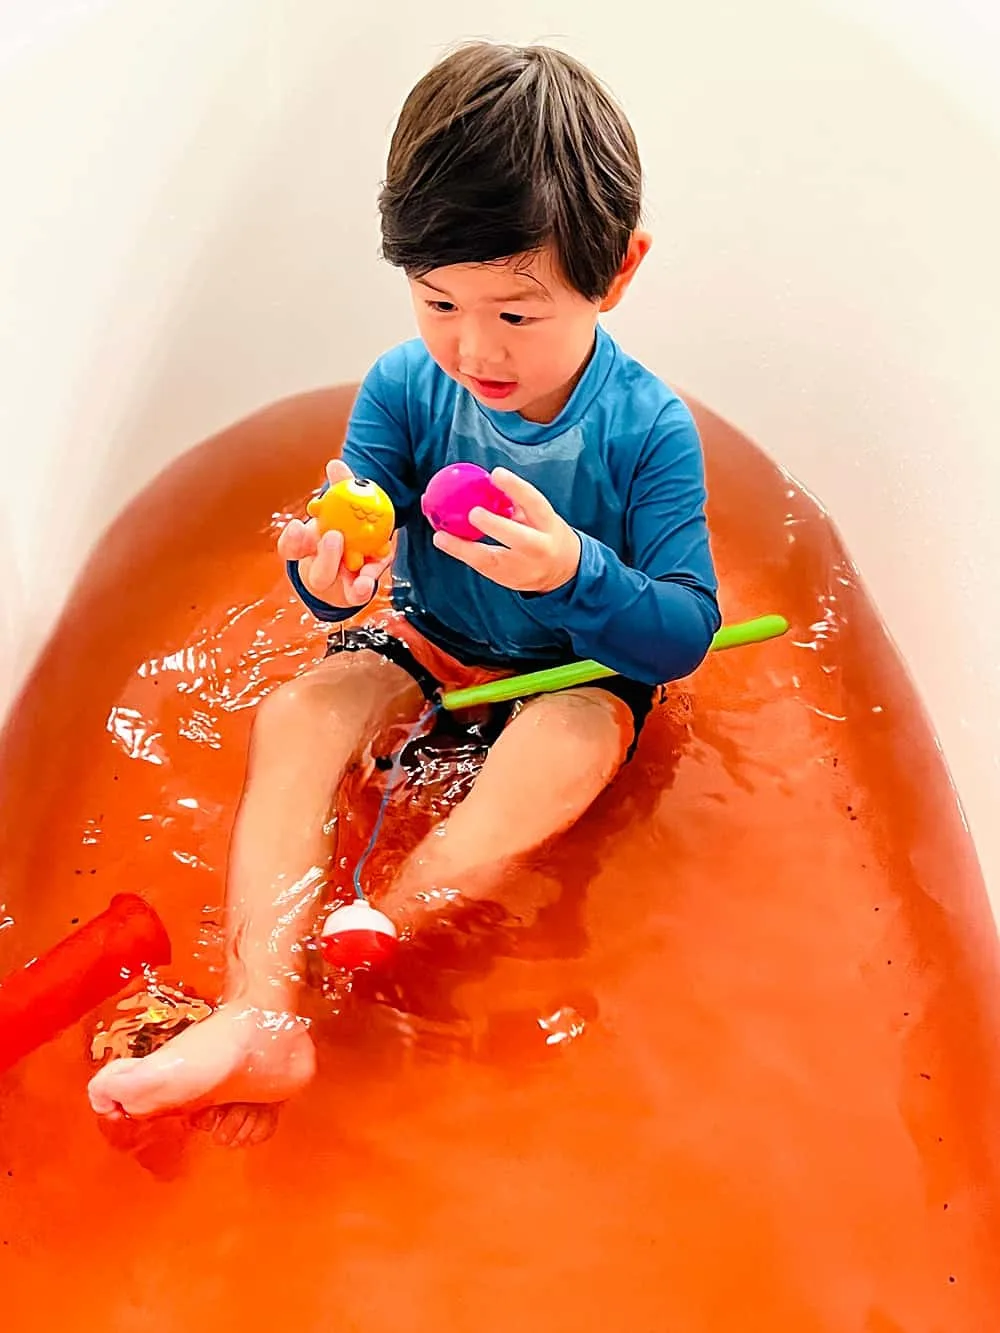 Toy Review: Crayola Bath Dropz Color Changing Water. Bath Time Fun! 